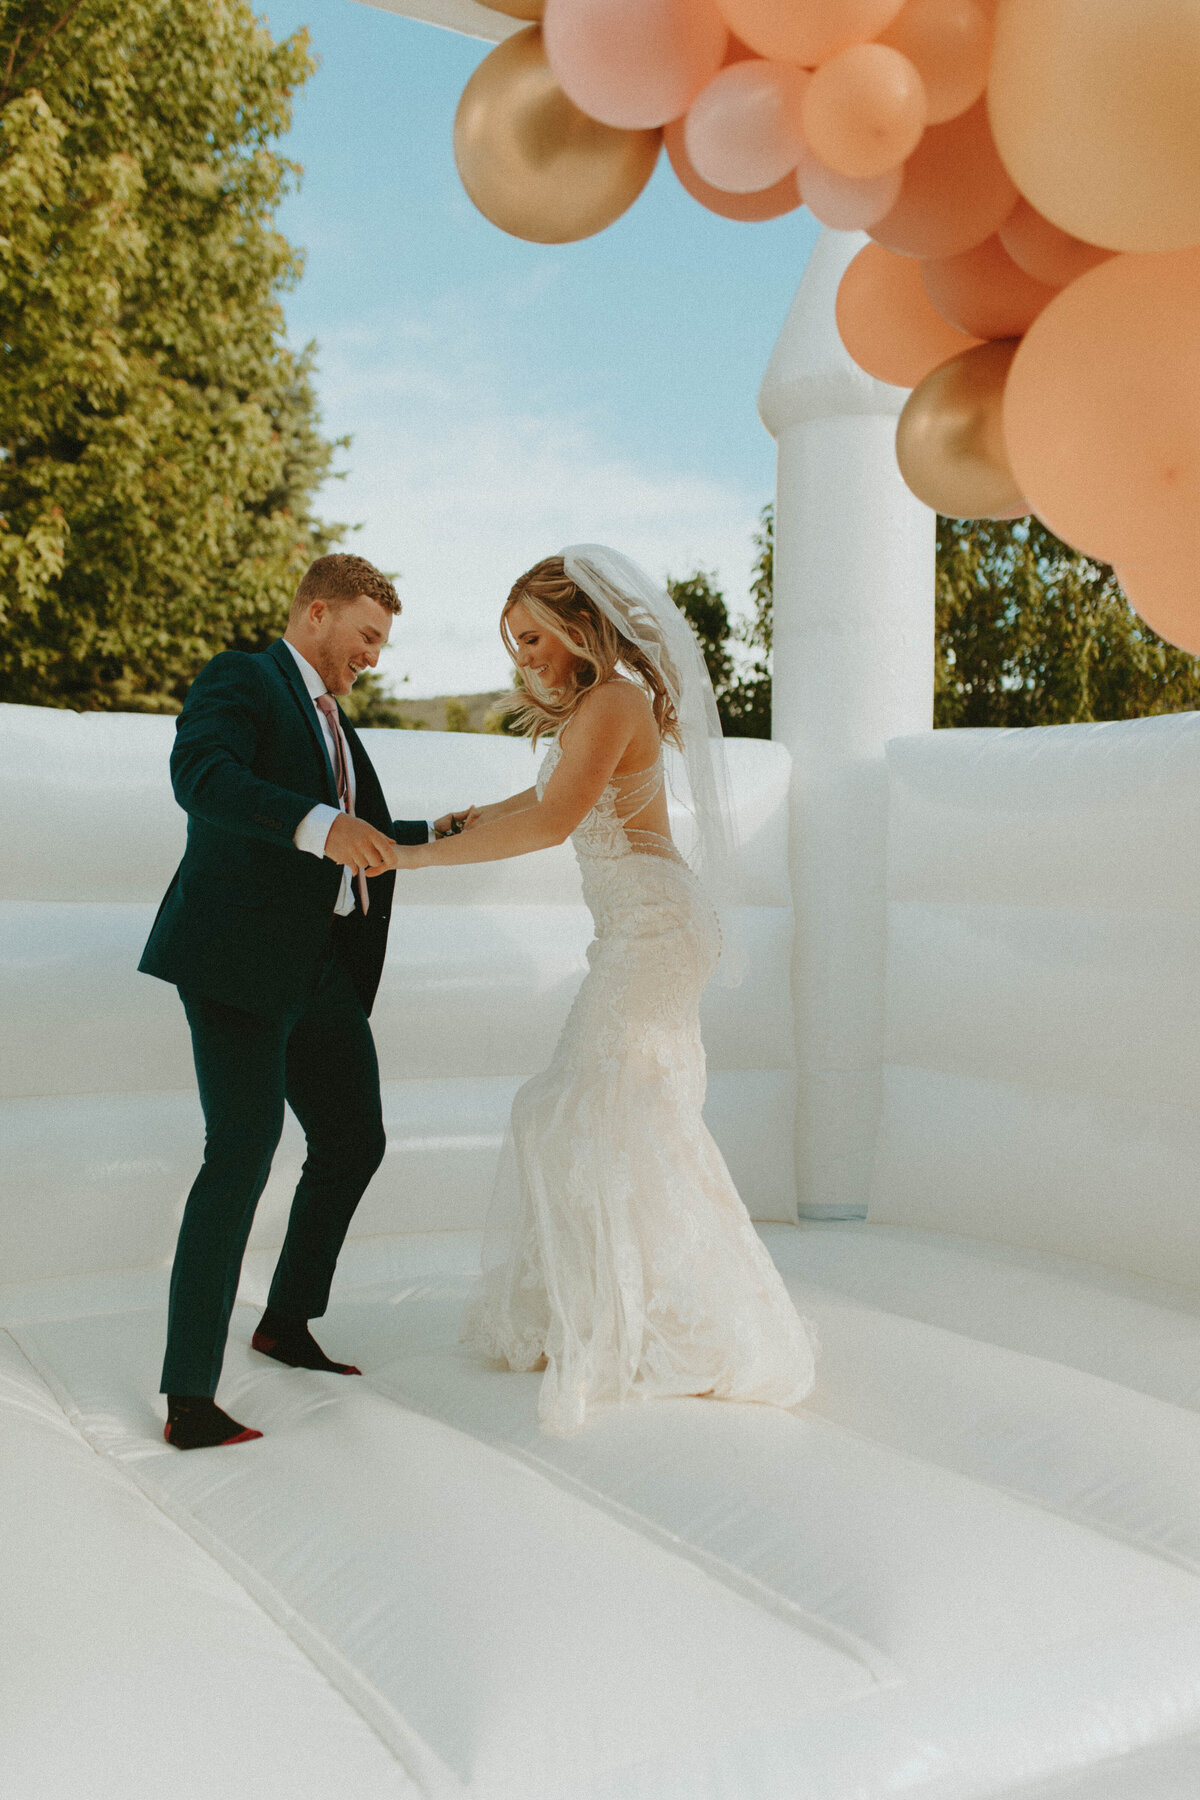 Bride and groom jumping in a white bouncy house.